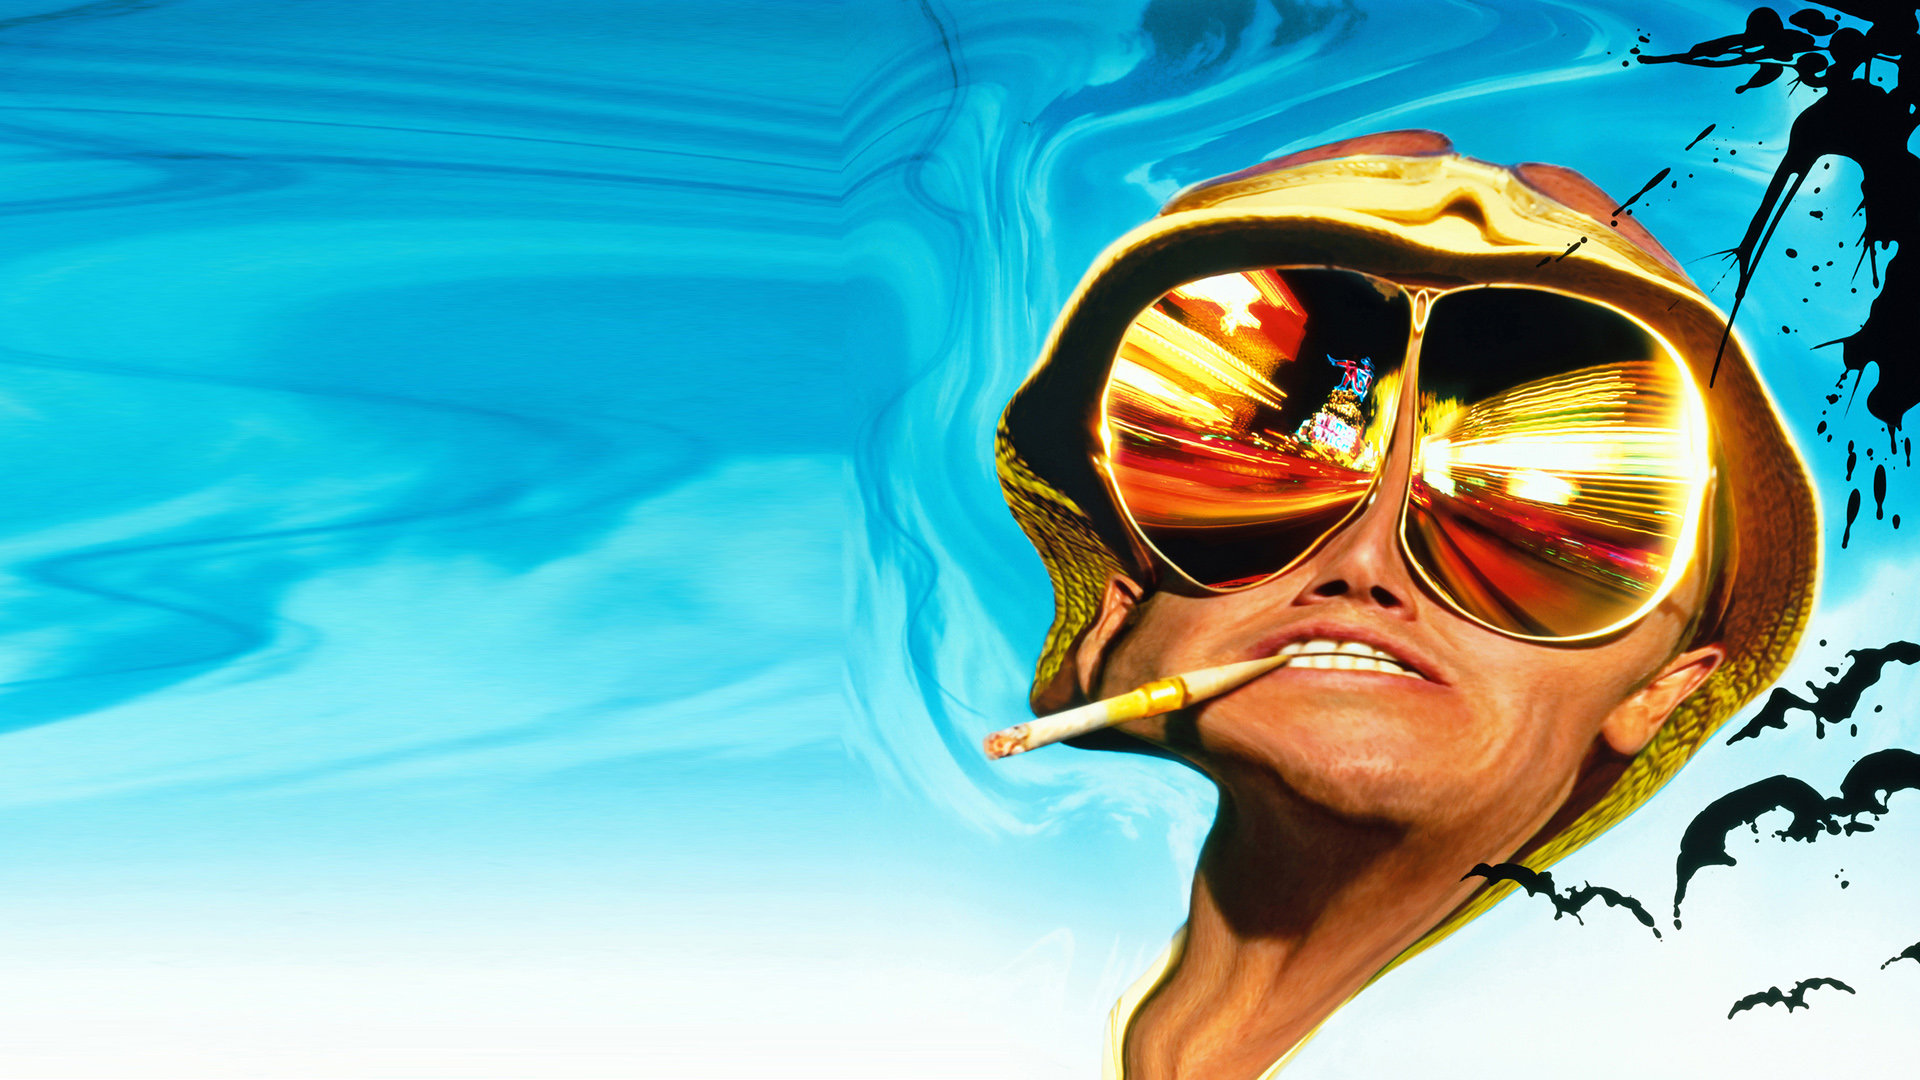 Fear And Loathing In Las Vegas background ID:86636 for 1080p desktop.